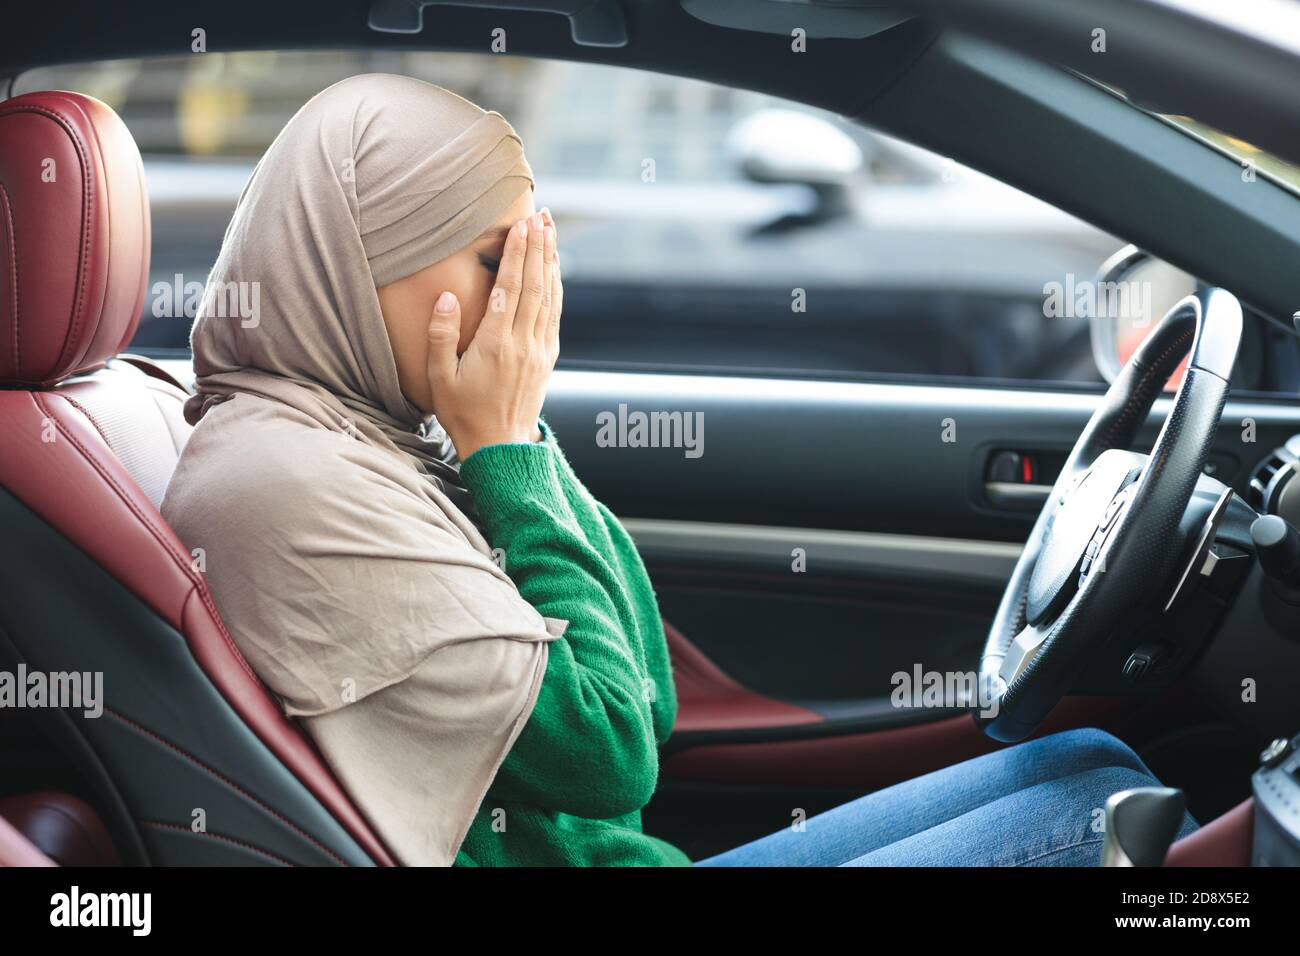 Sad muslim woman driving her car, crying, covering face Stock Photo